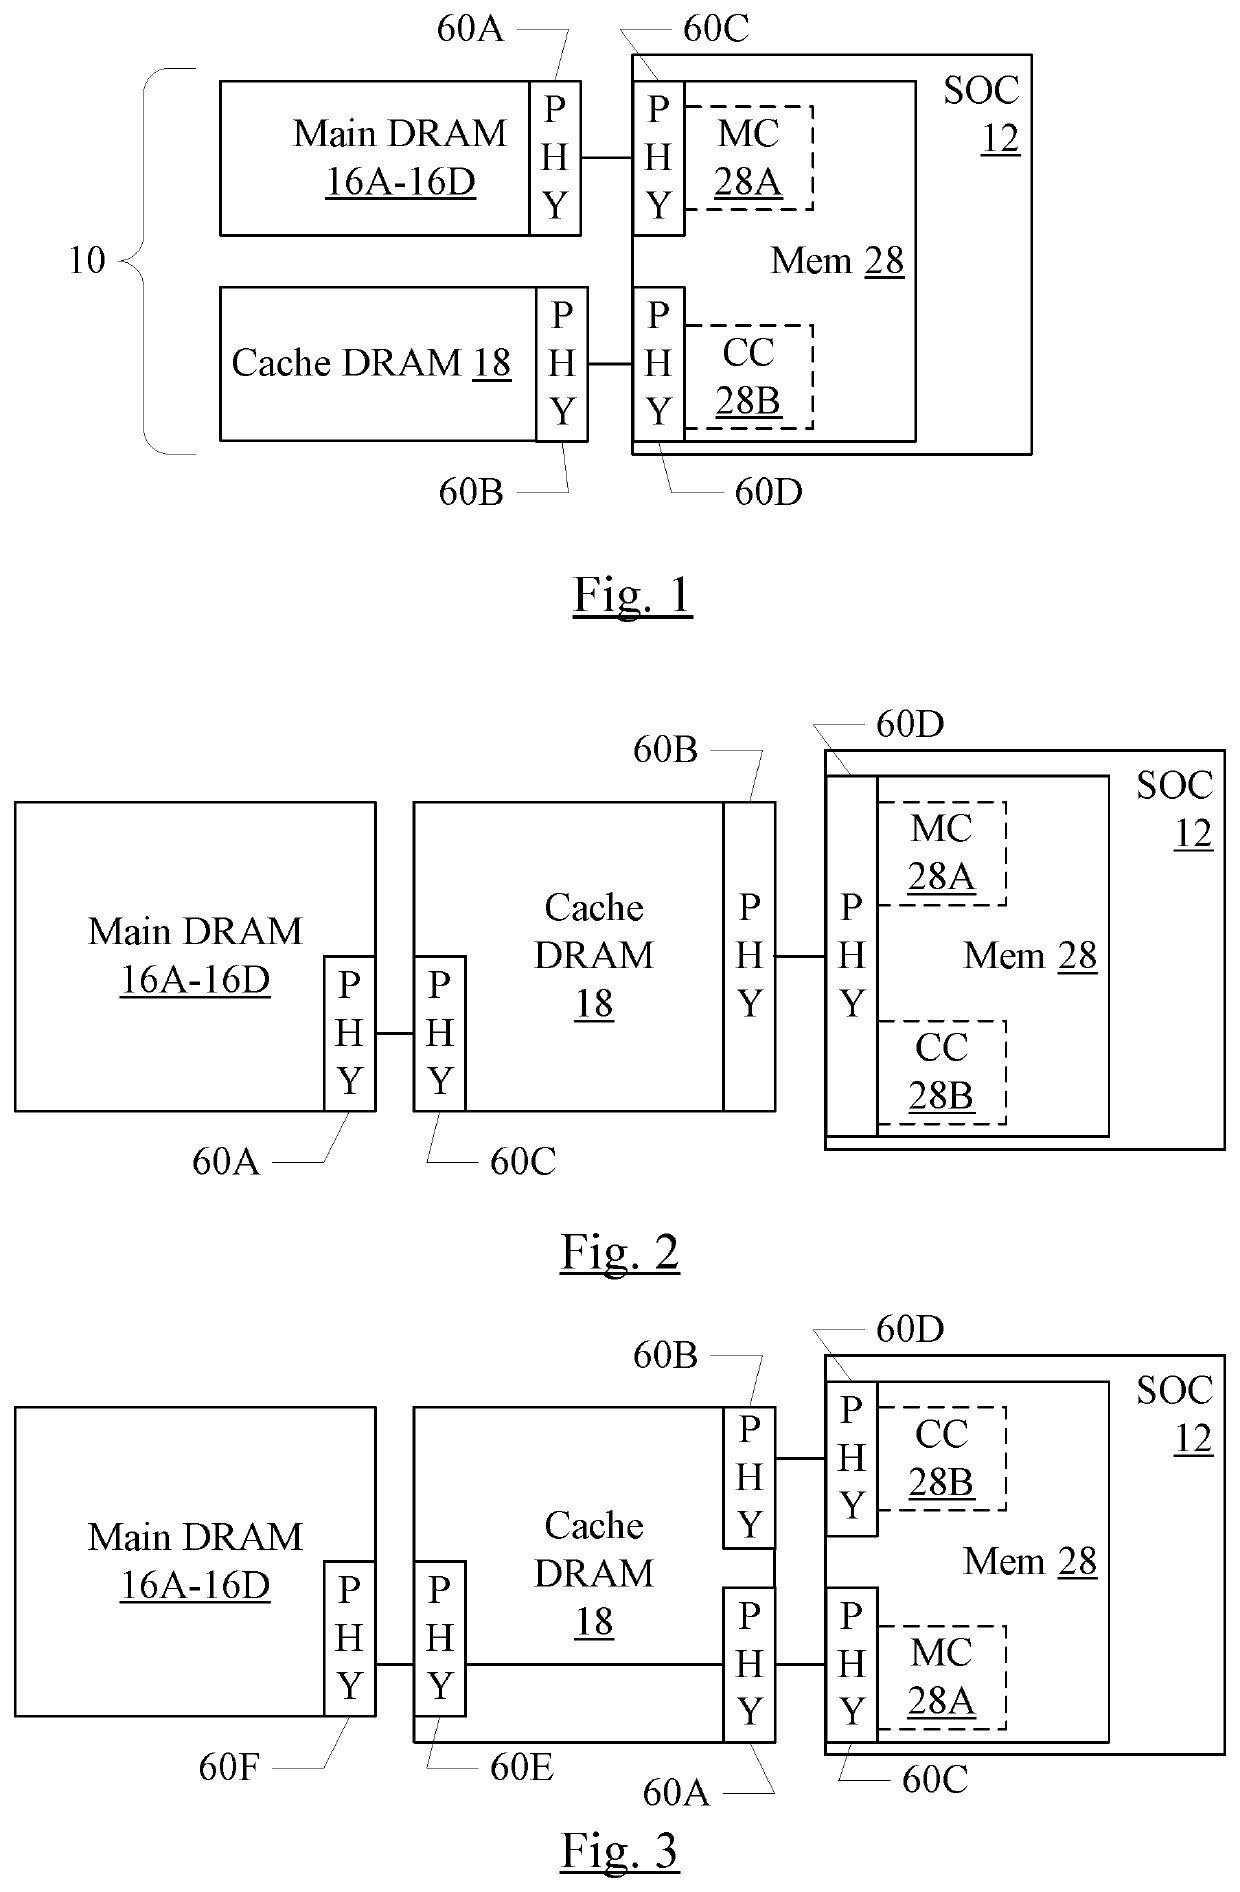 Memory system having combined high density, low bandwidth and low density, high bandwidth memories